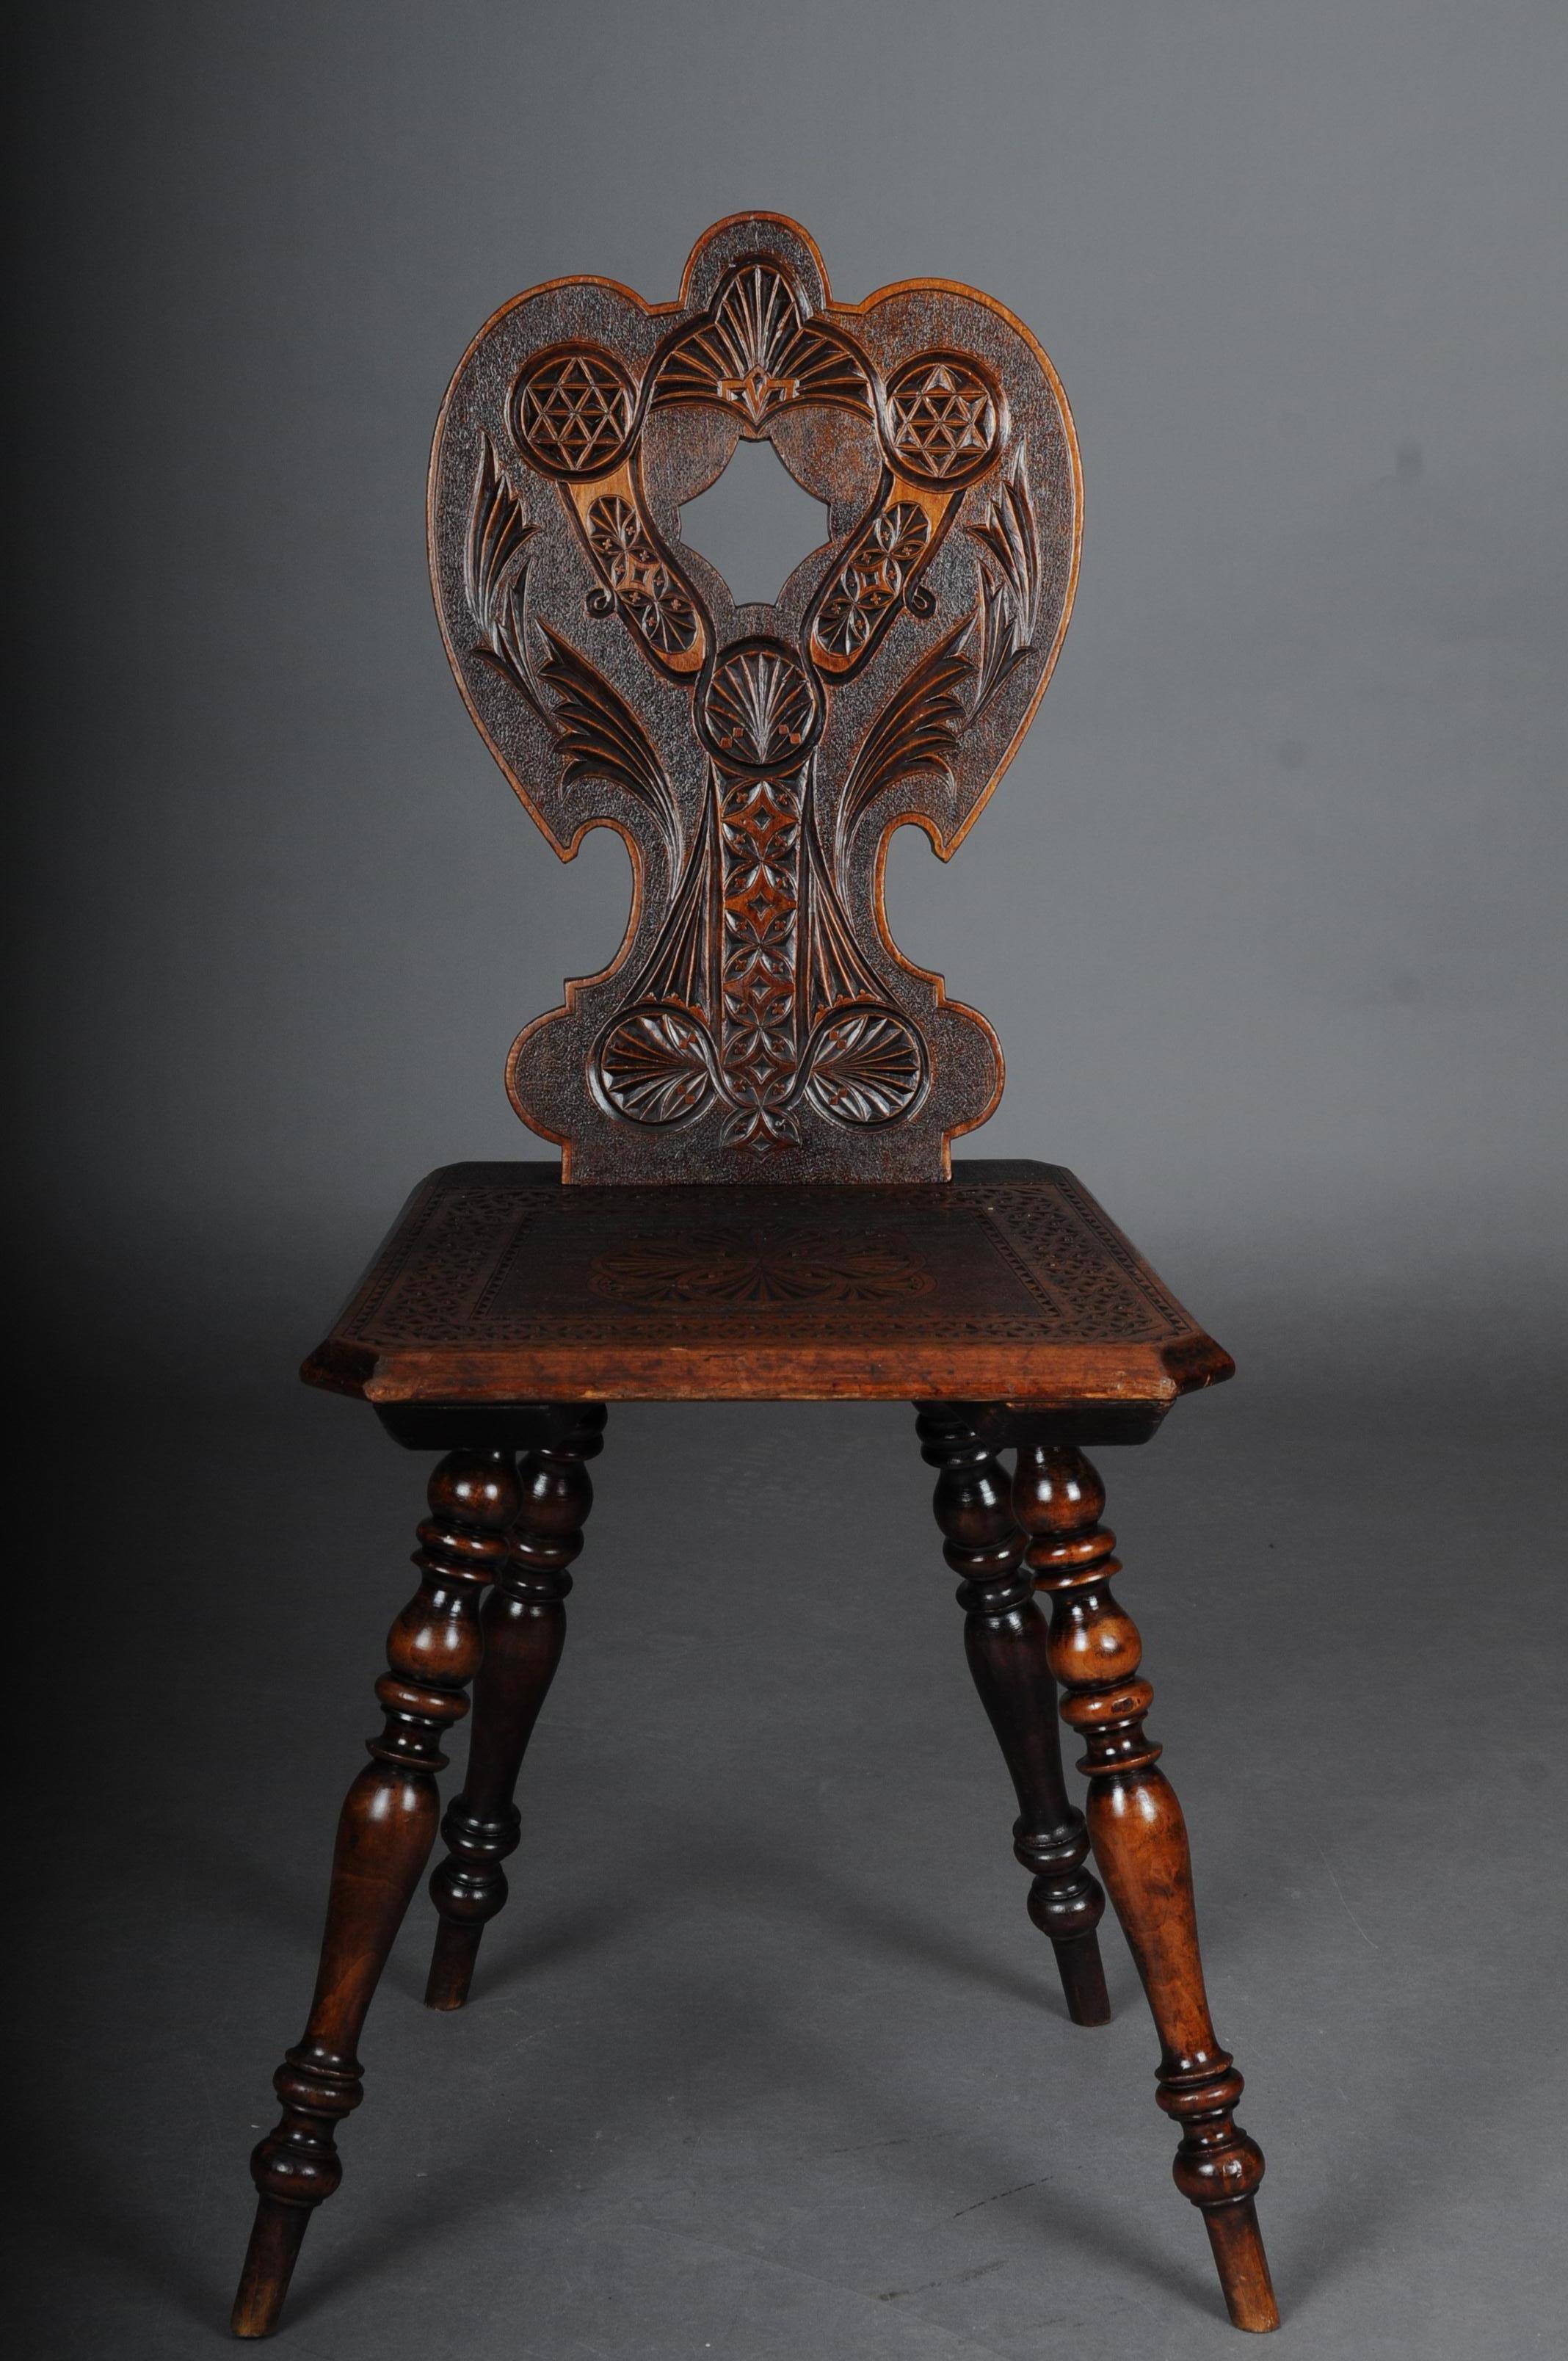 Antique Neo Renaissance board chair historicism circa 1870, oak D

Solid dark oak. Straight seat on turned and tapered legs. Jewish.
Backrest with Davidstern notched carvings. Extremely decorative and rare historicism chairs with rich